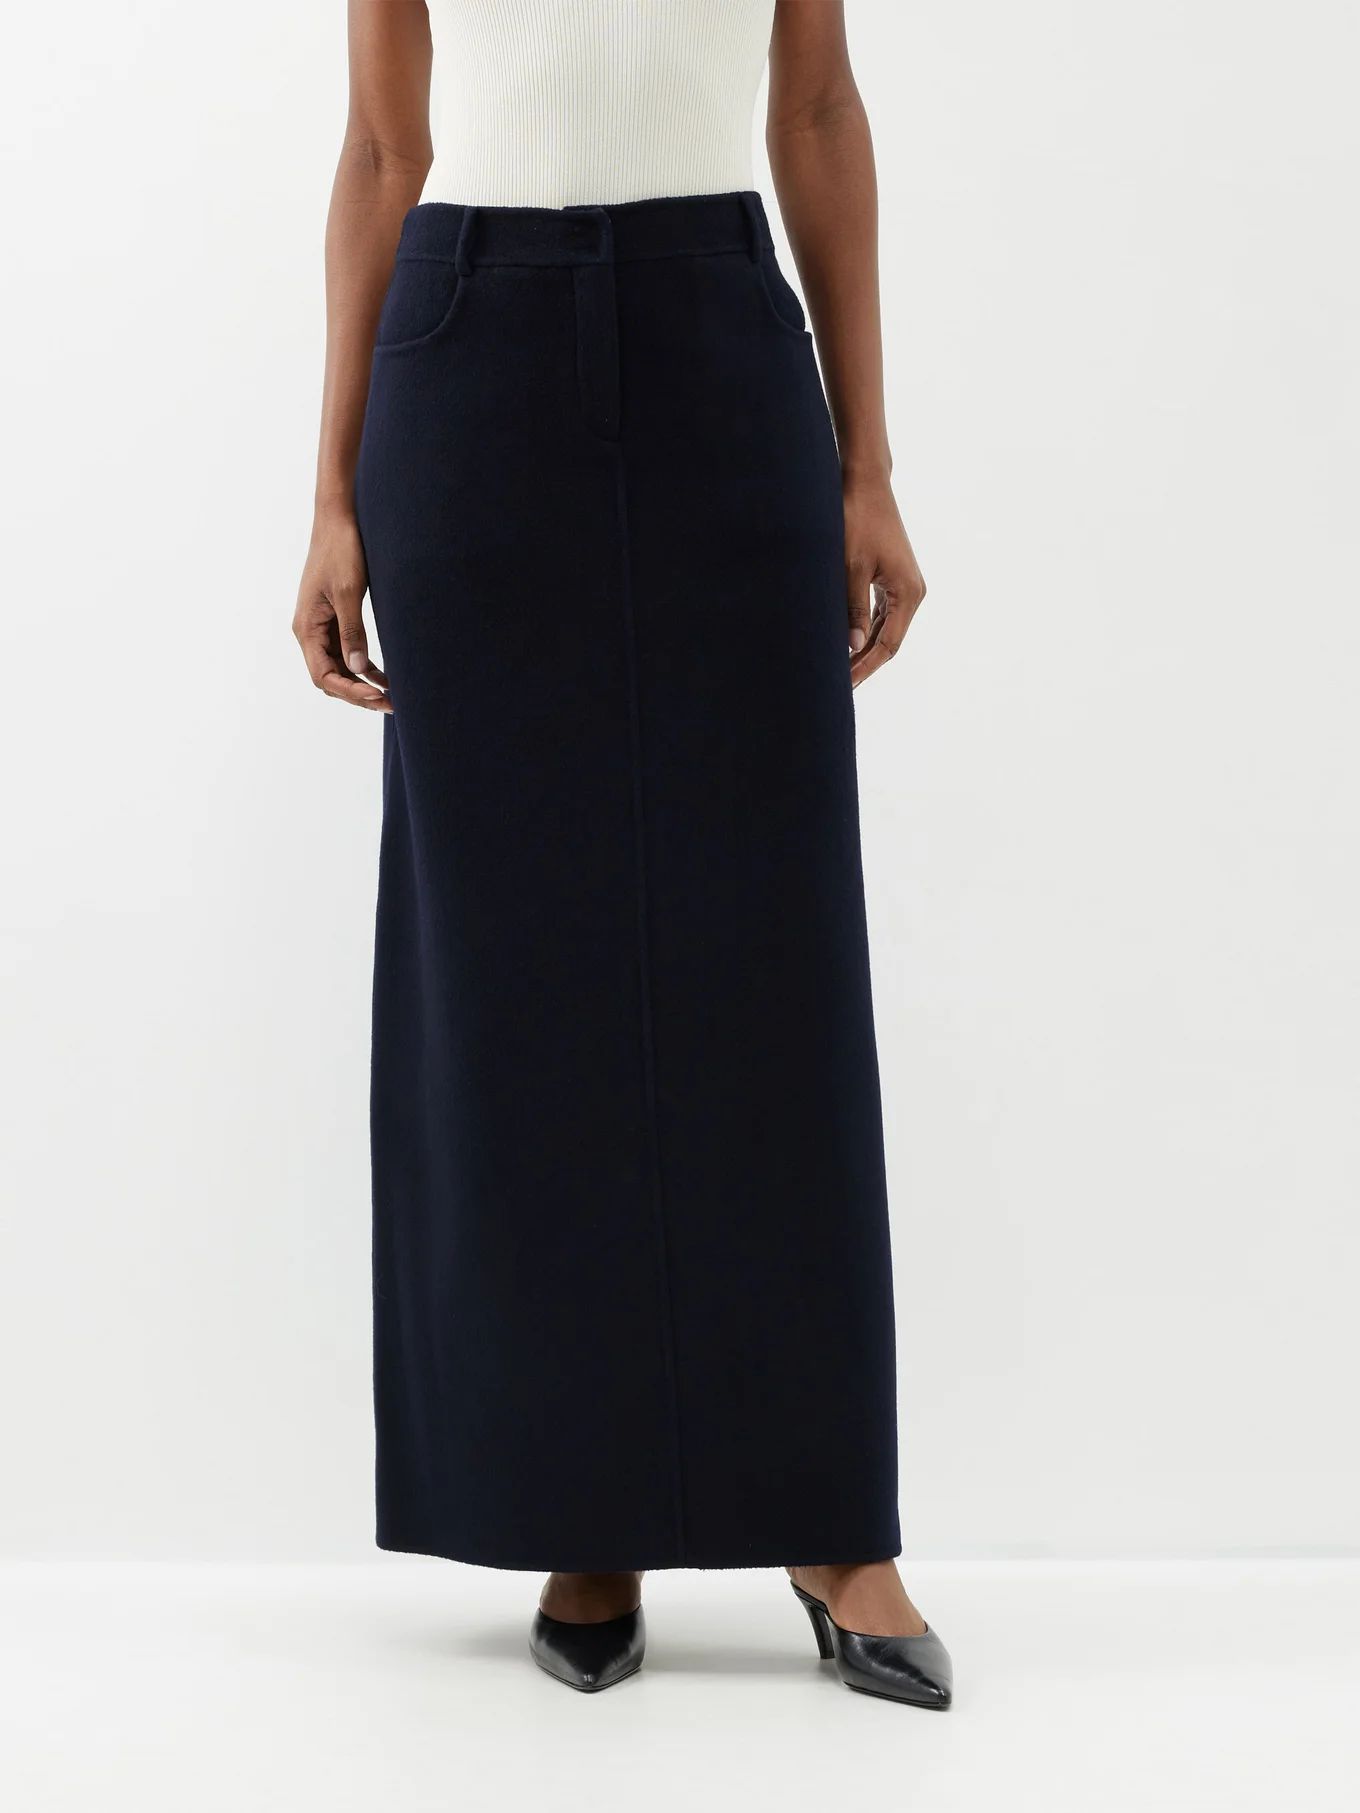 Malvo double-faced wool-blend skirt | The Frankie Shop | Matches (US)